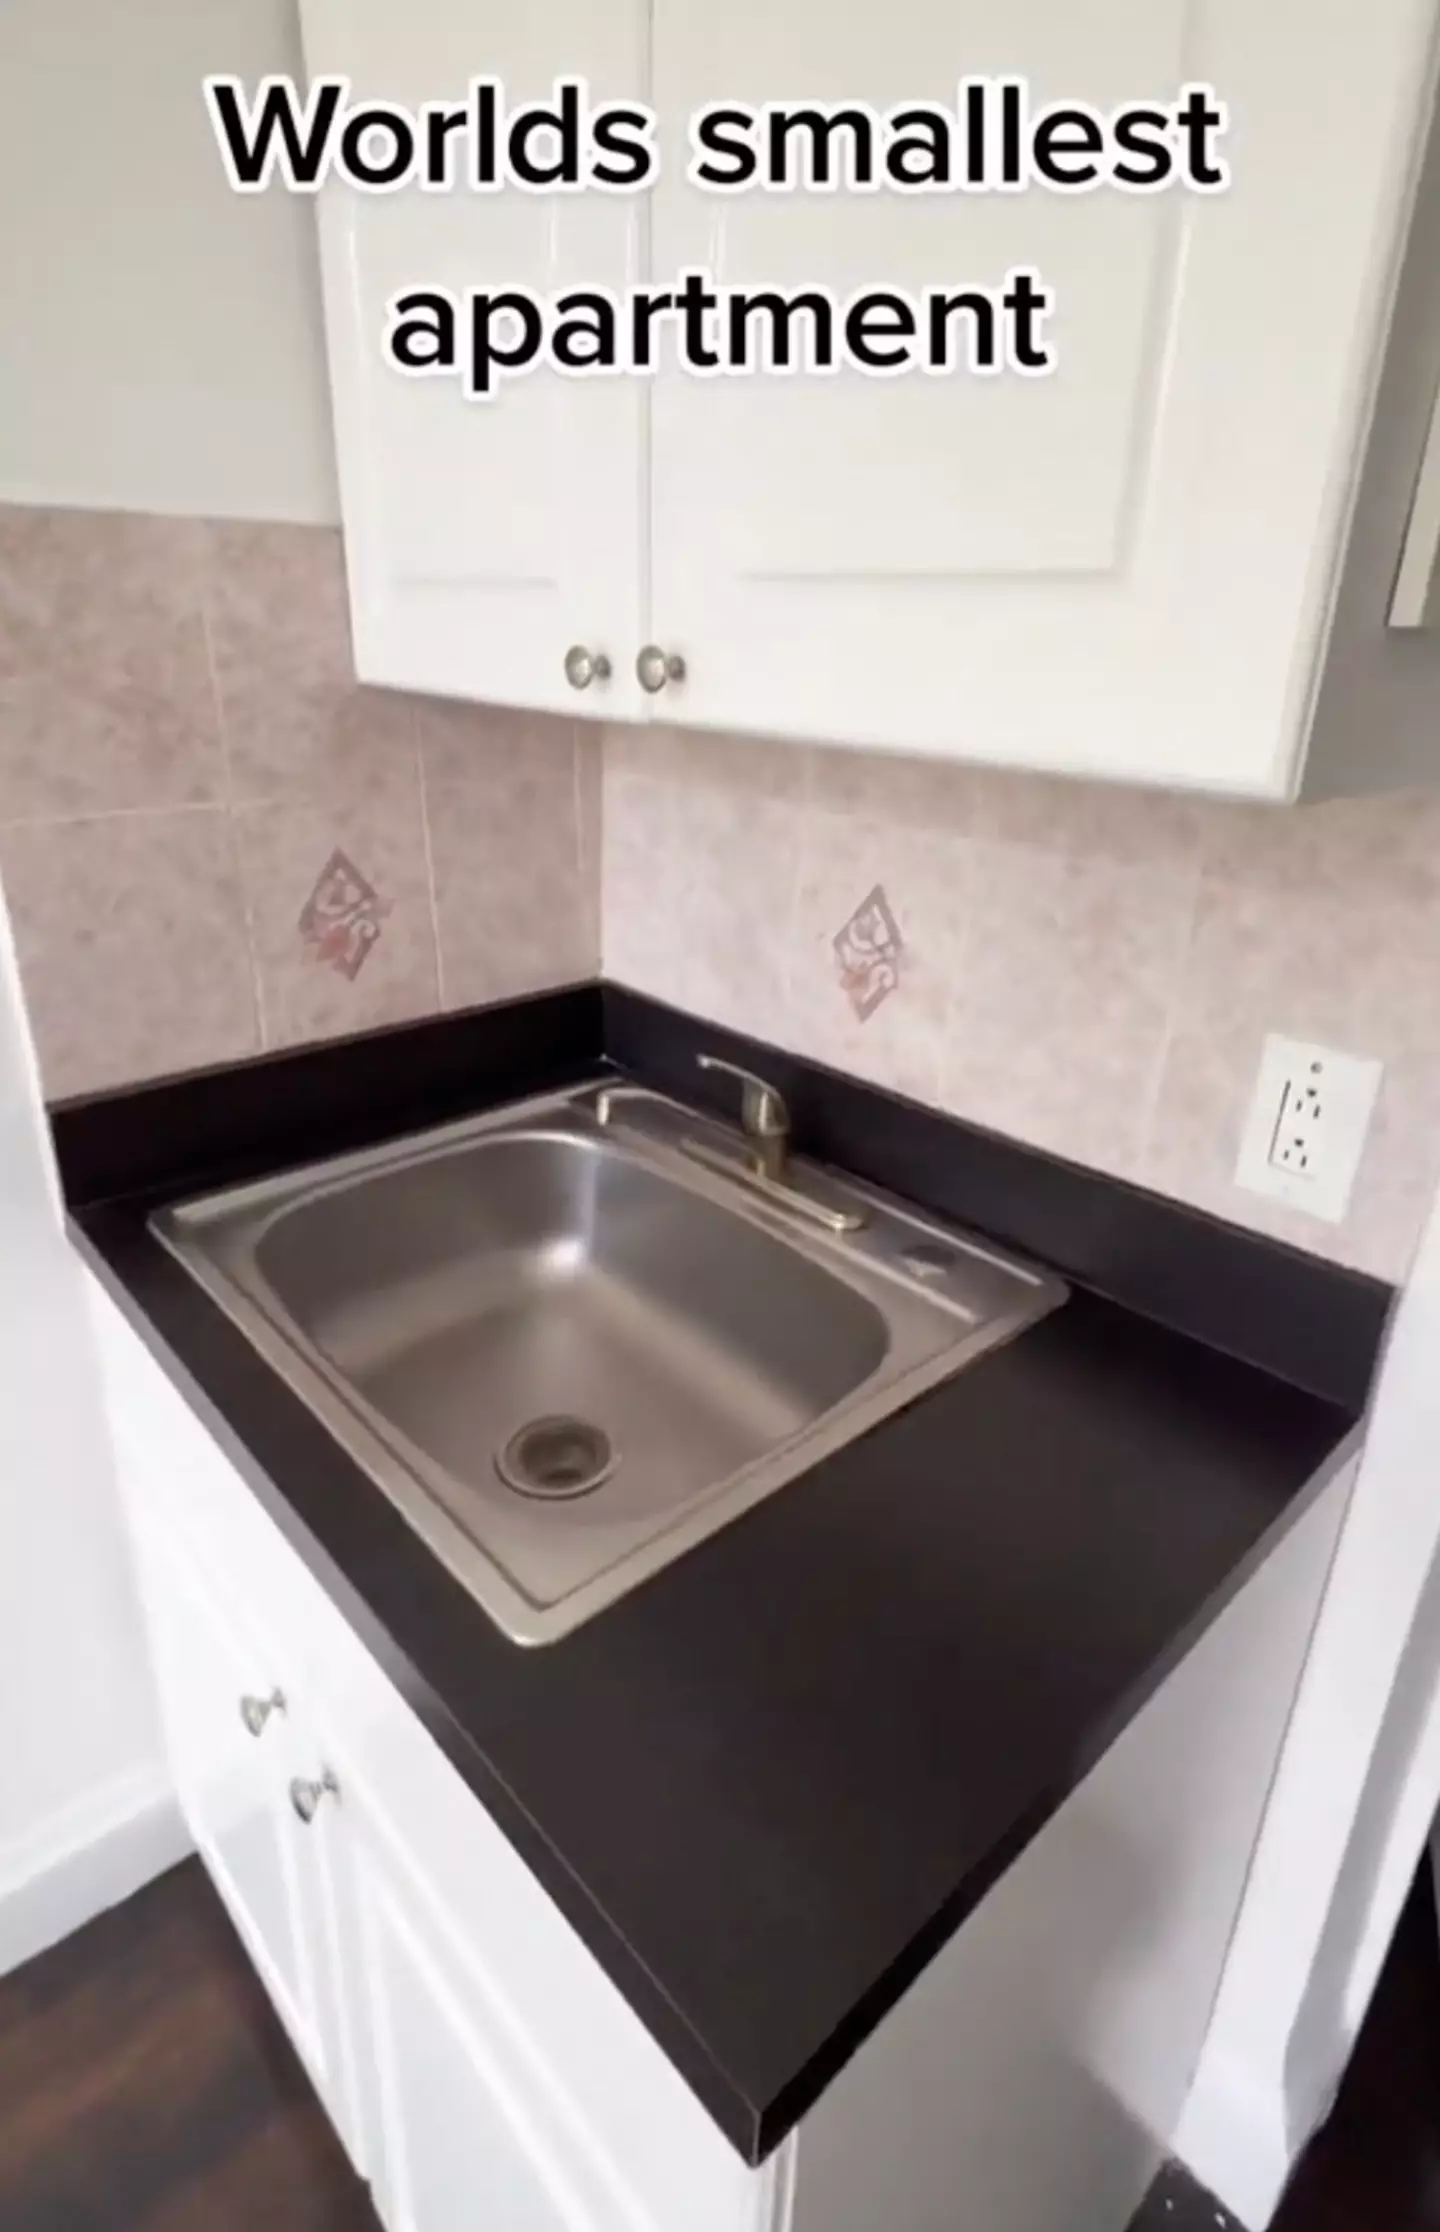 At least it comes with a sink?!